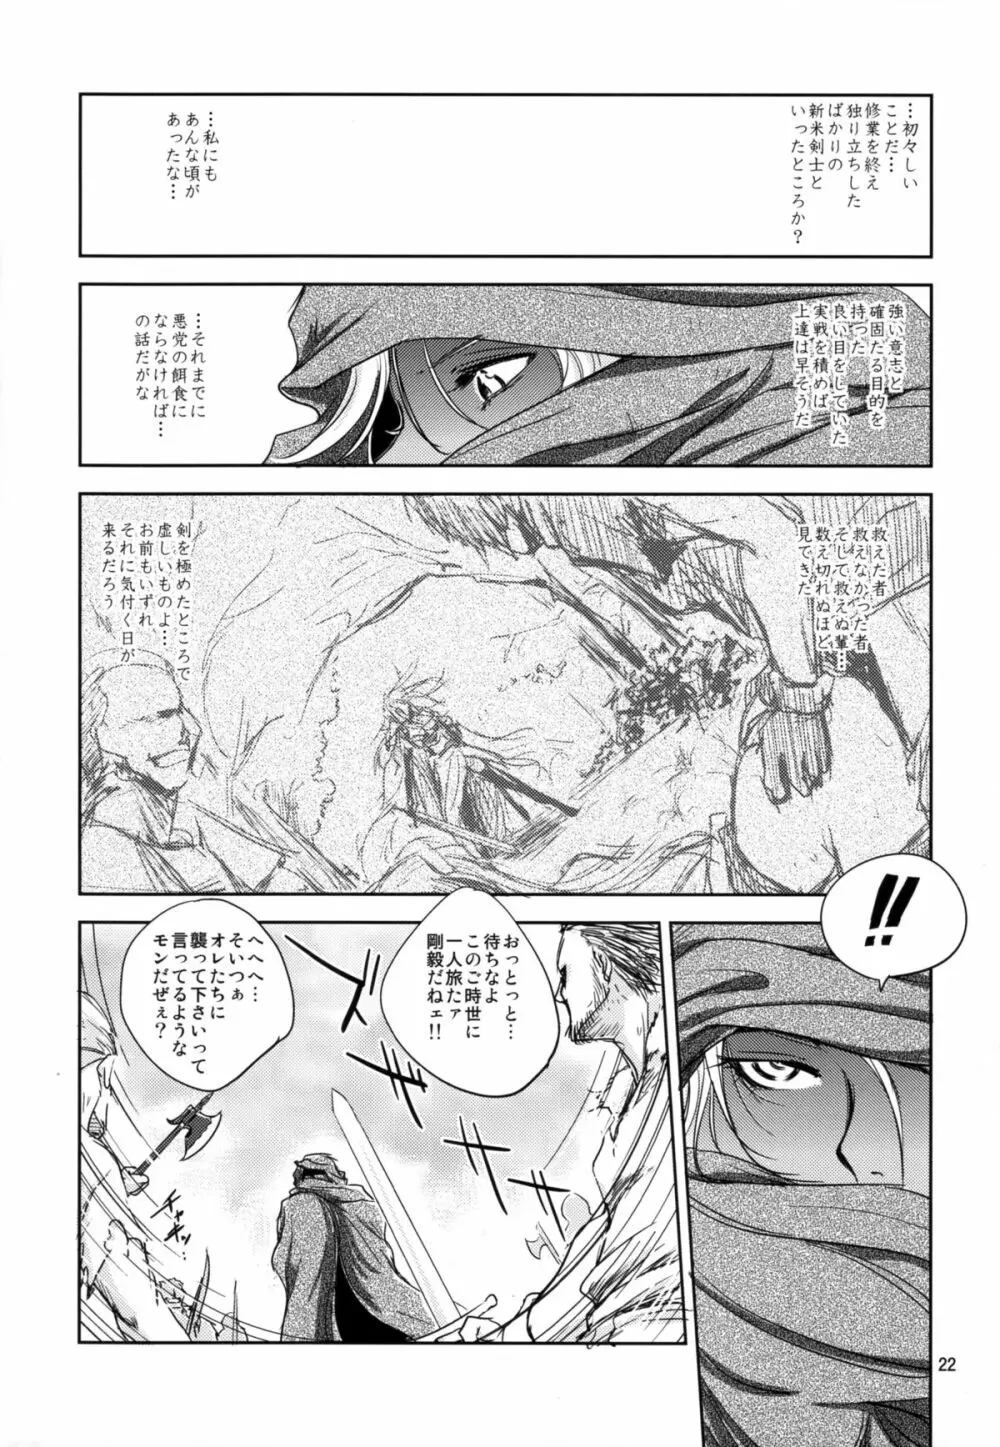 GRASSEN'S WAR ANOTHER STORY Ex #04 ノード侵攻 IV - page22